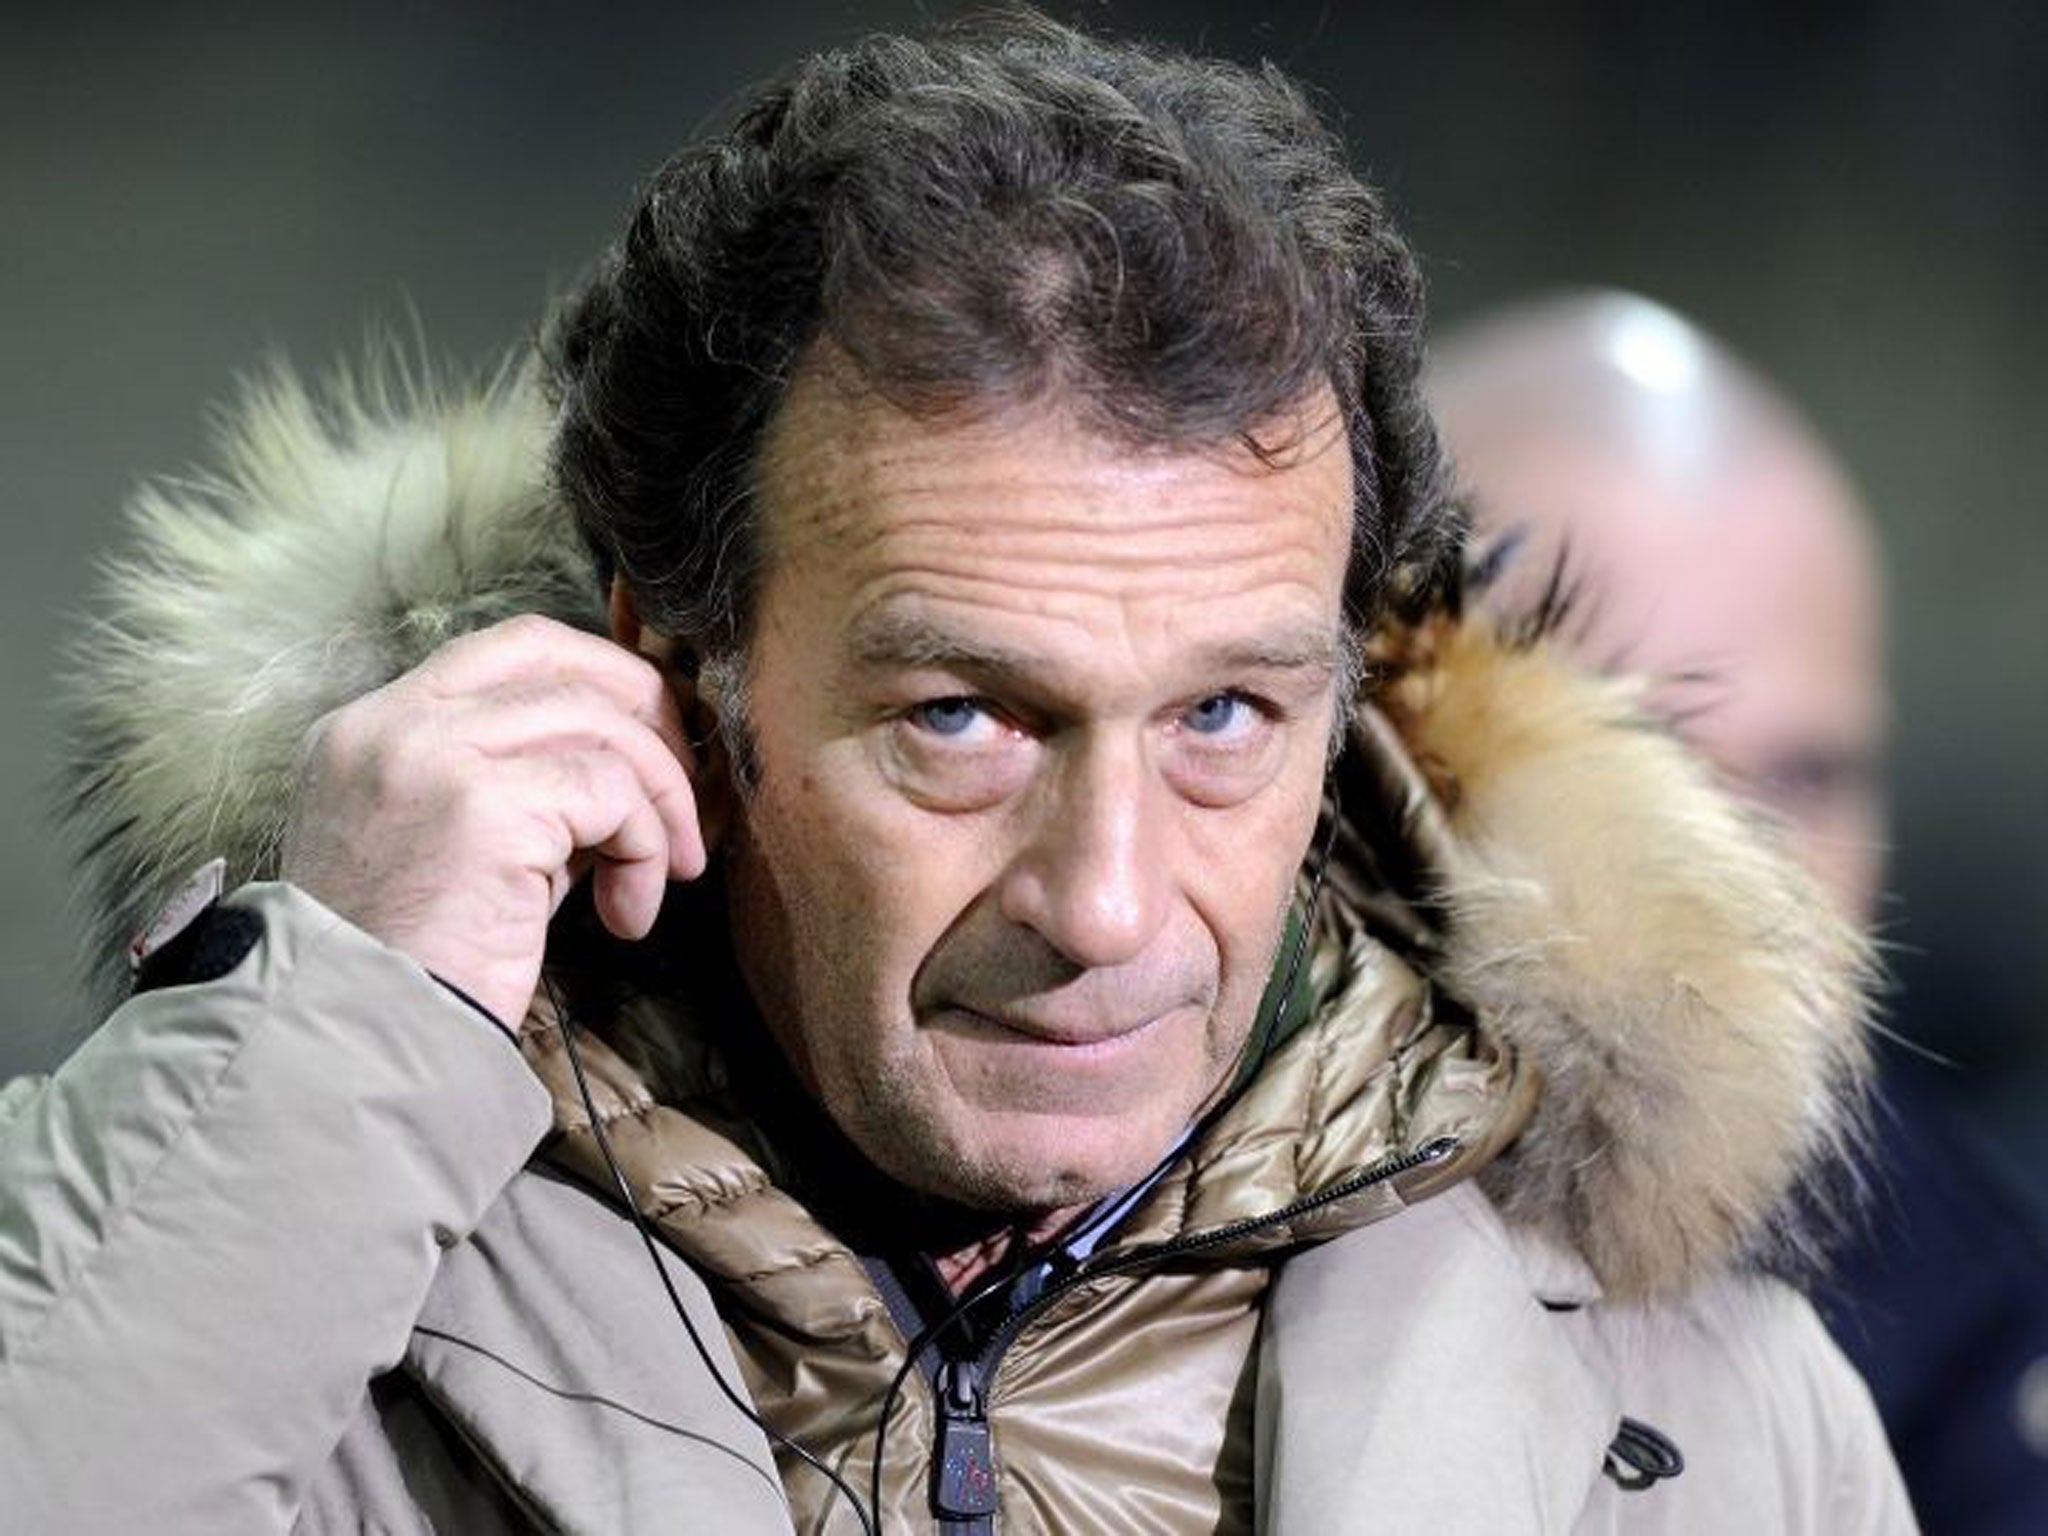 Massimo Cellino will soon be the new owner of Leeds United